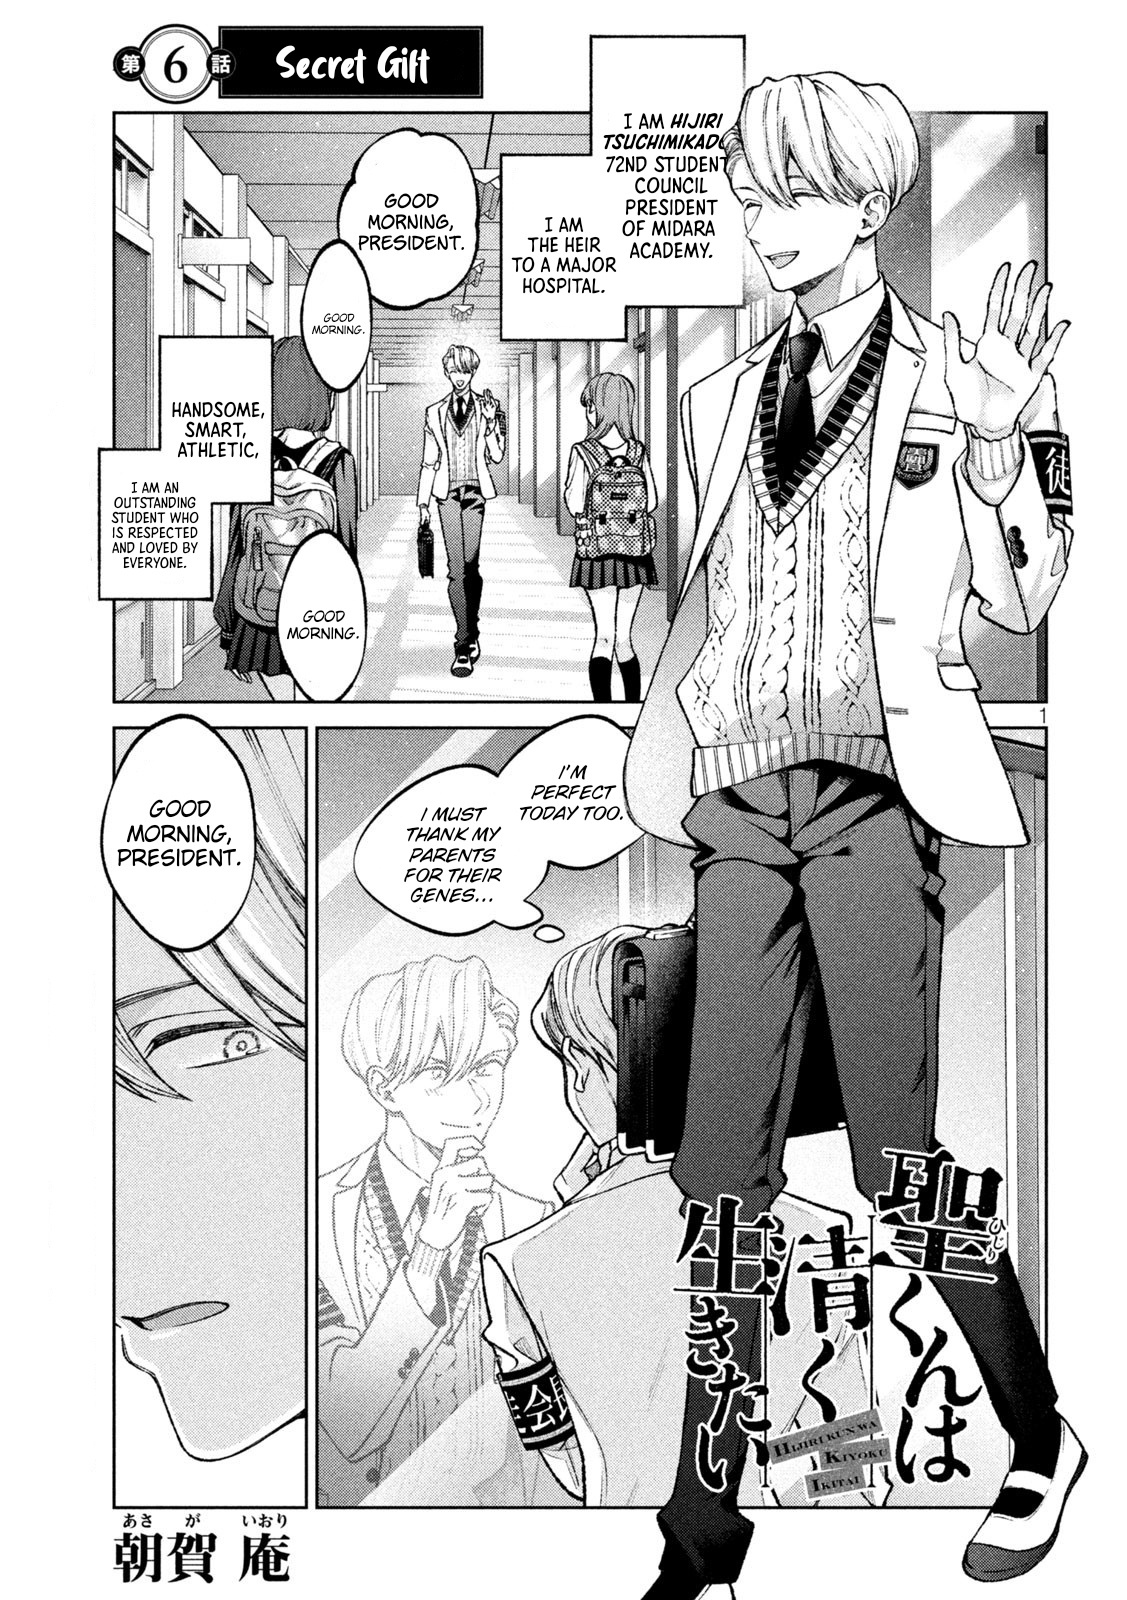 Hijiri-Kun Wants To Live A Pure Life Vol.1 Chapter 6: Secret Gift - Picture 2